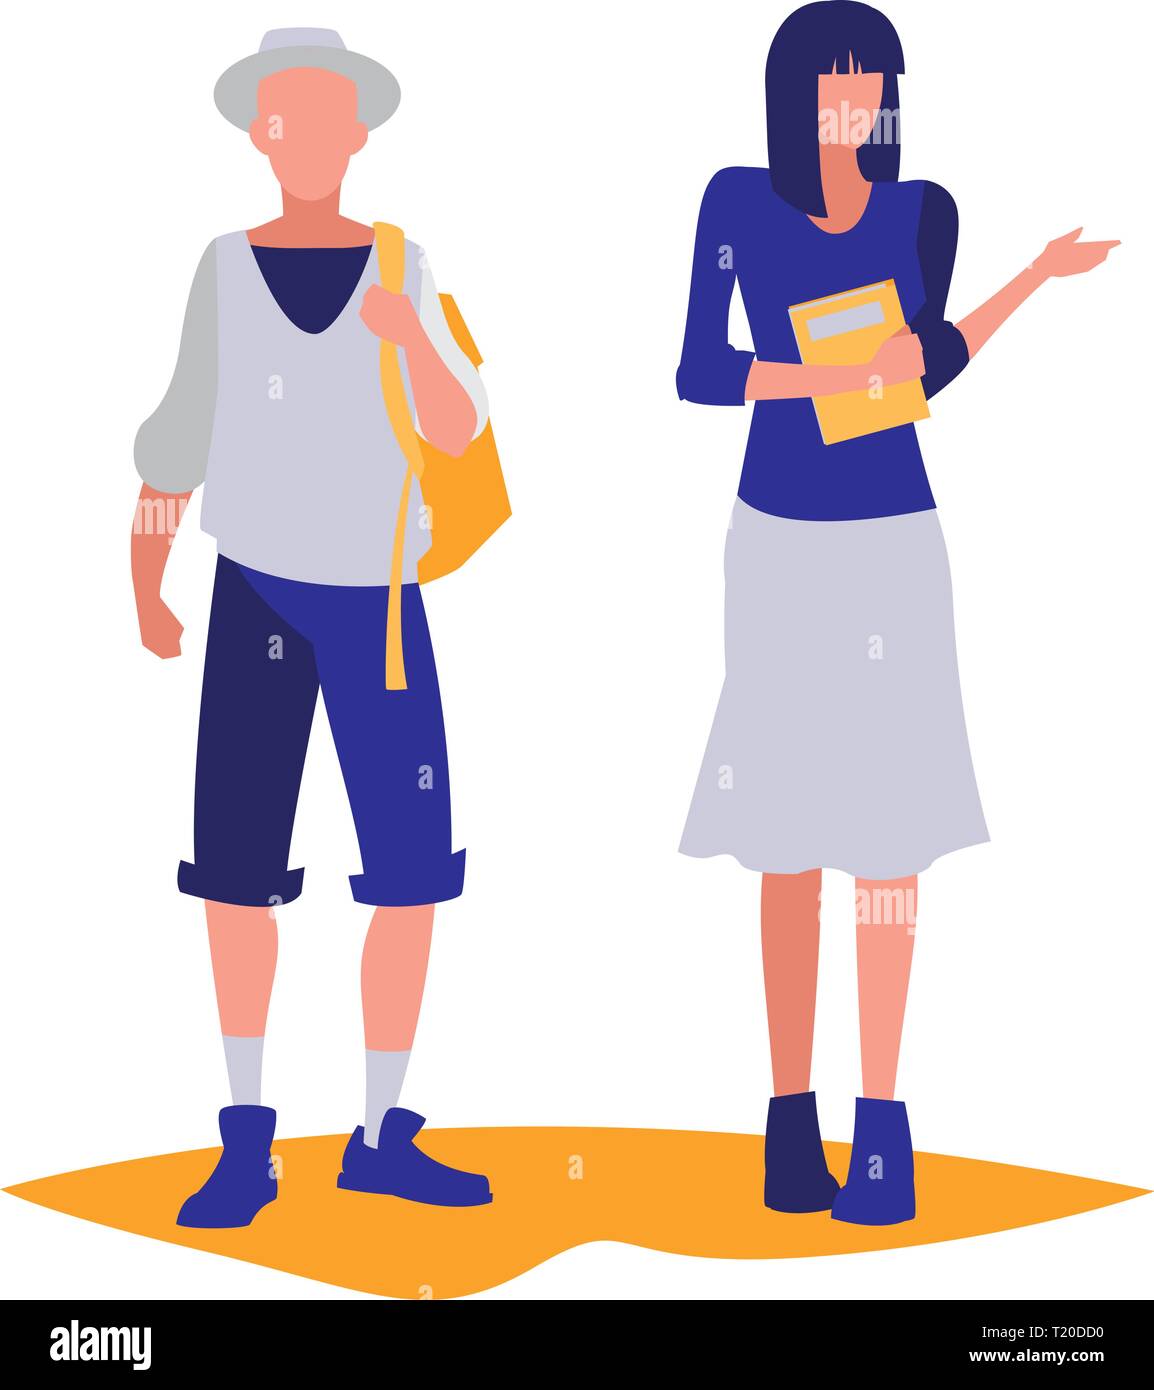 young couple students modeling vector illustration design Stock Vector